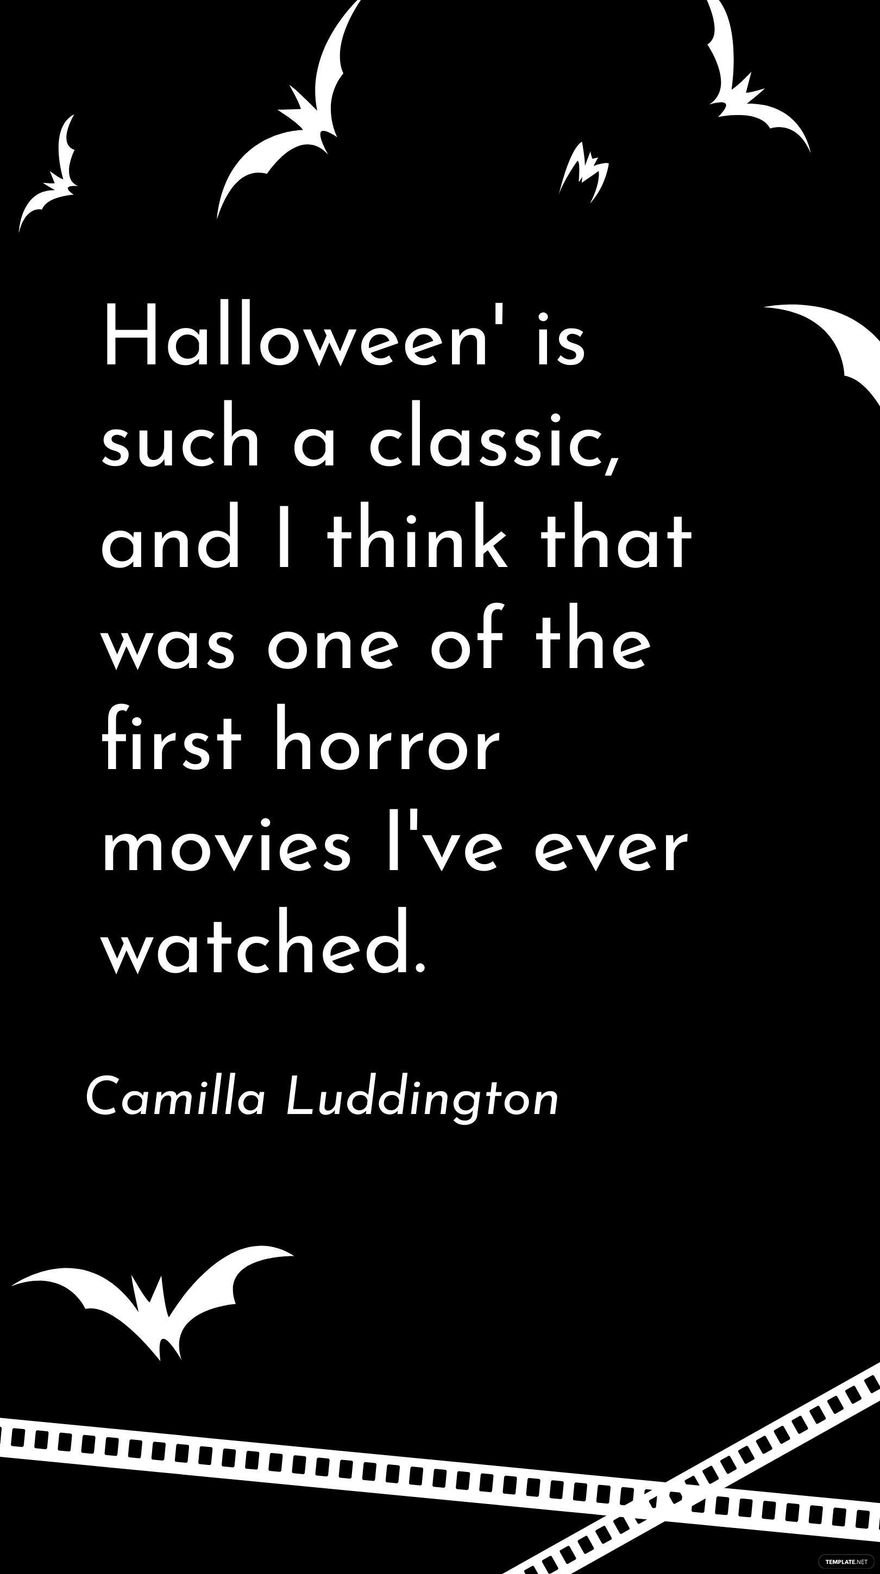 Free Camilla Luddington - Halloween' is such a classic, and I think that was one of the first horror movies I've ever watched.